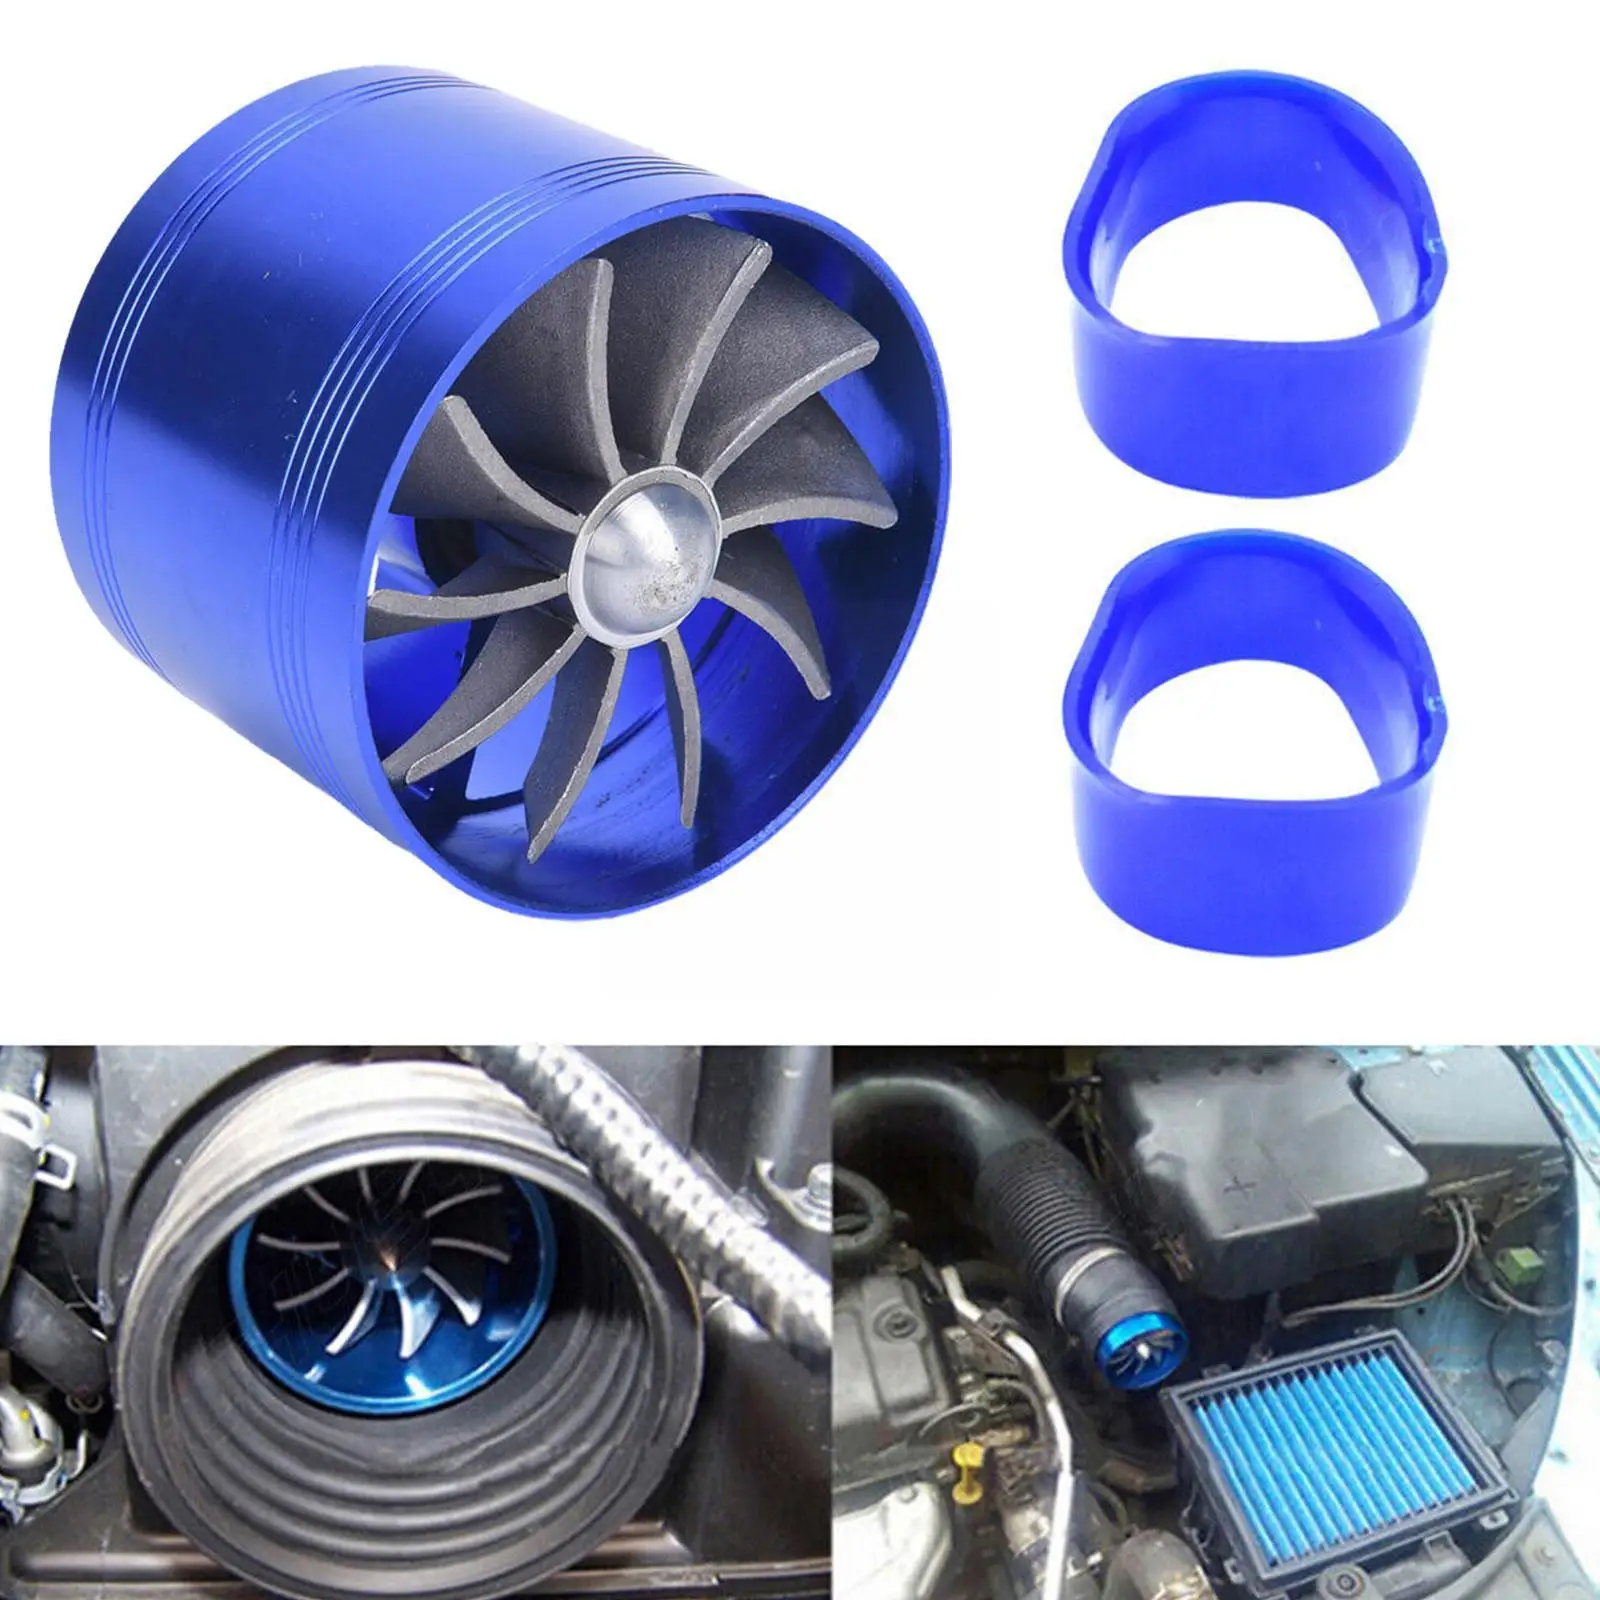 

Double Supercharger Car Turbo Air Intake Turbine Gas Fuel Saver Fan Turbine with Single Propeller 6.4 * 5cm for Air Intake Hose